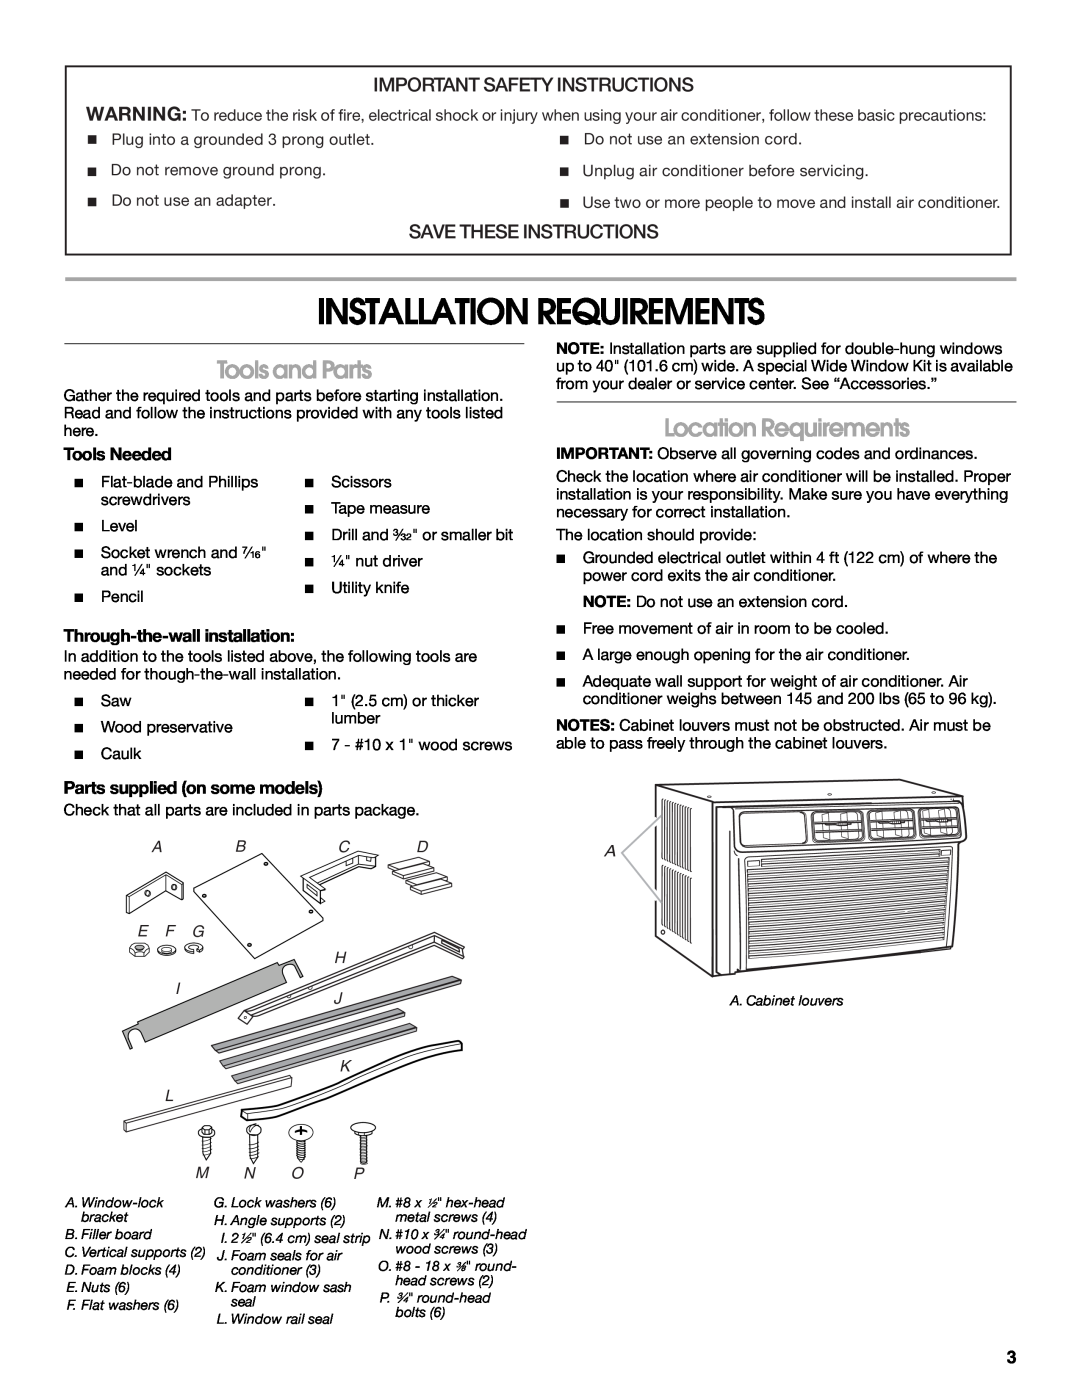 Whirlpool ACE184XR0 manual Installation Requirements, Tools and Parts, Location Requirements, Important Safety Instructions 